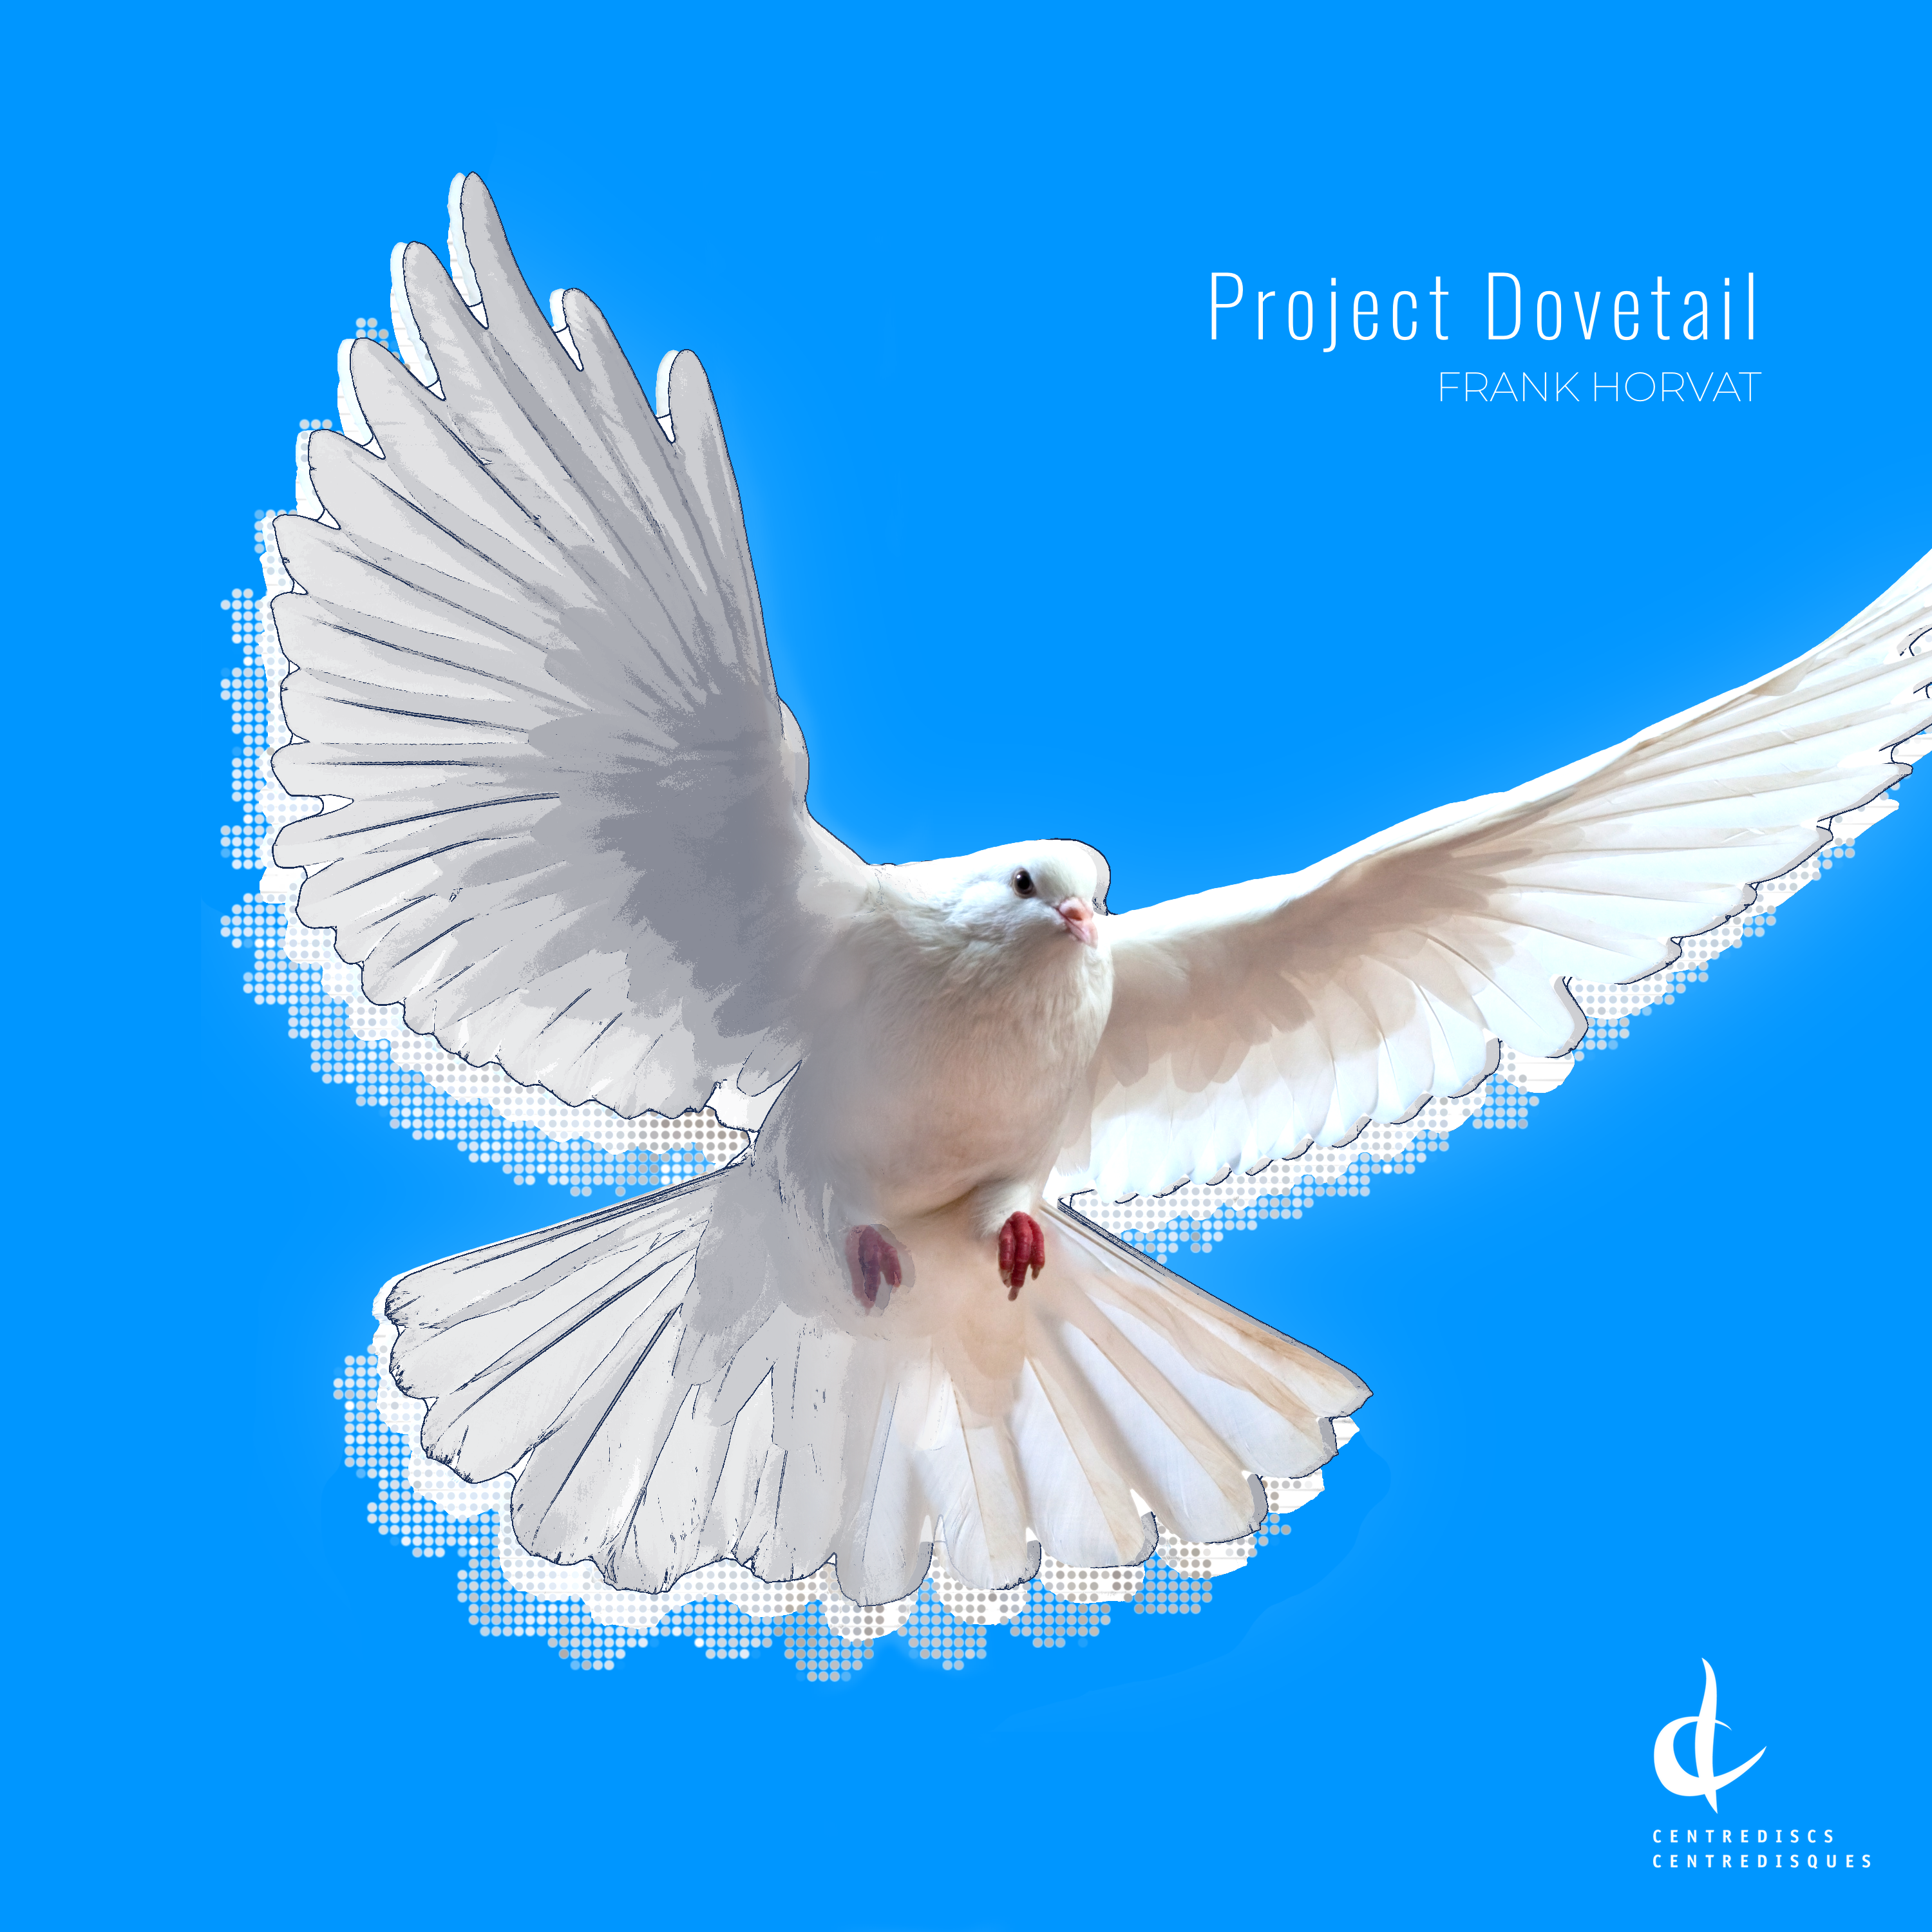 Album Release: Project Dovetail